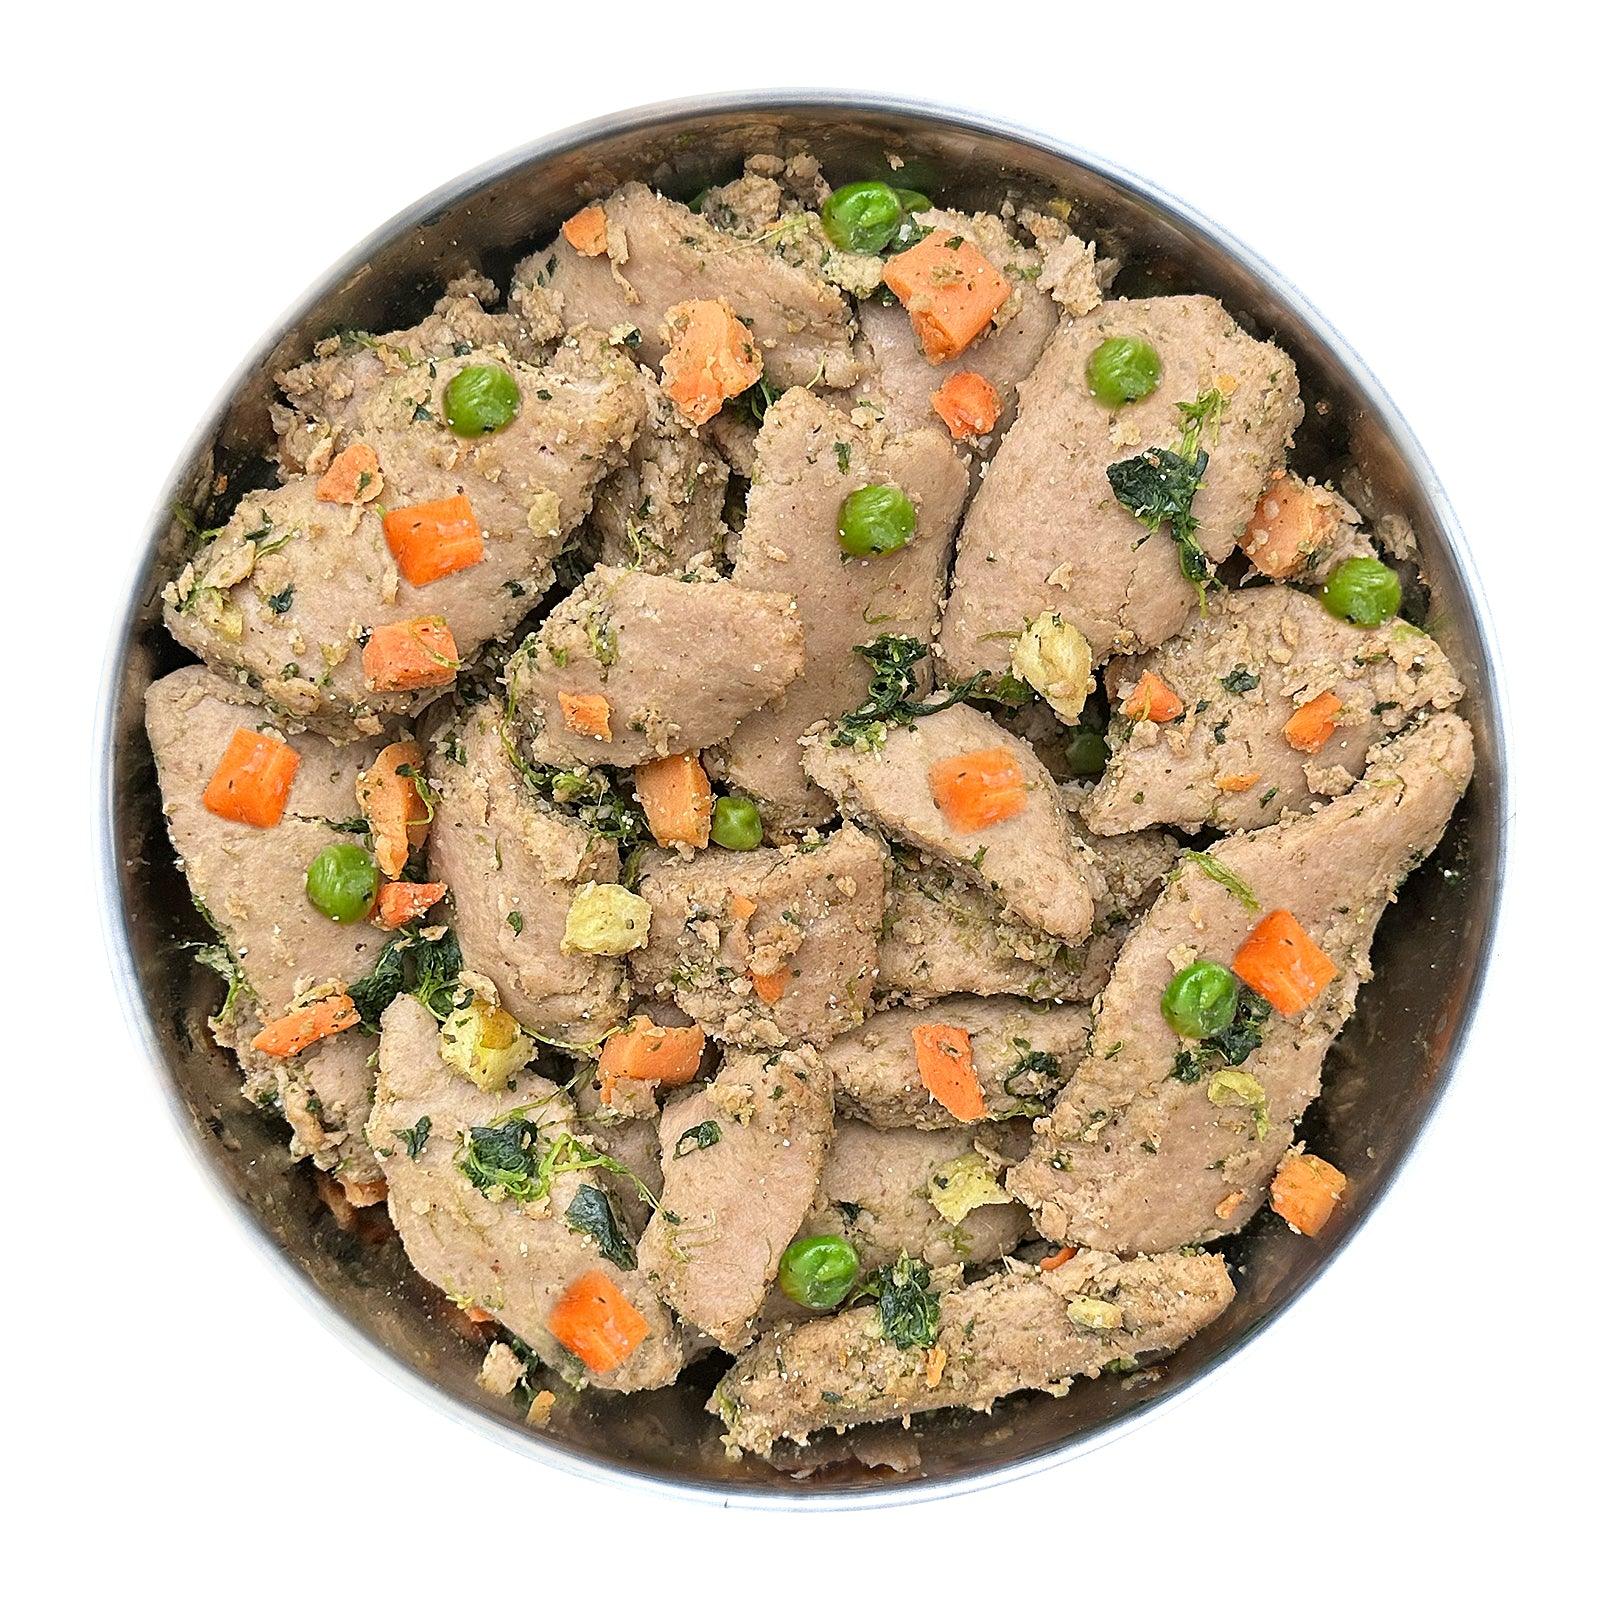 Cooked Fresh Turkey with Sweet Potato, Peas and Spinach (glass)